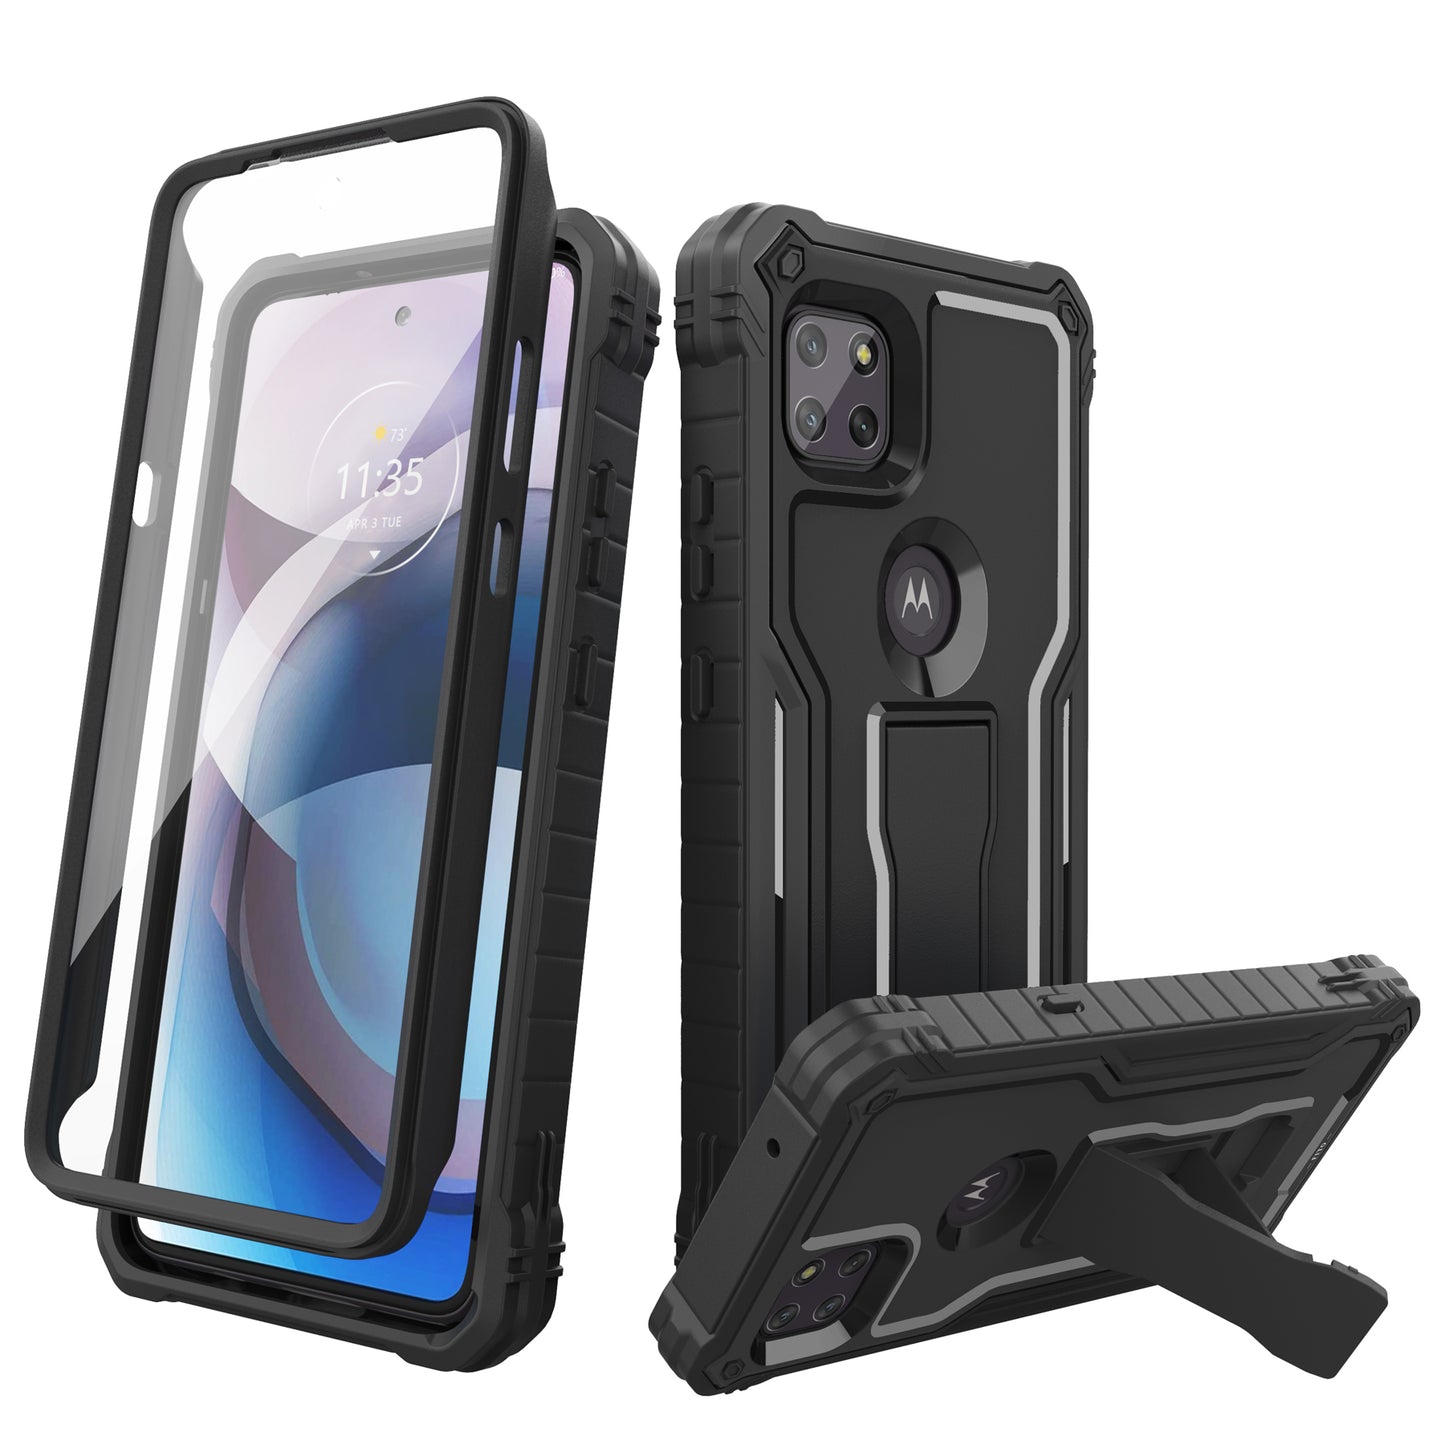 FITO for Moto One 5G ACE Case, Dual Layer Shockproof Heavy Duty Case for Motorola One 5G ACE Phone with Screen Protector, Built-in Kickstand